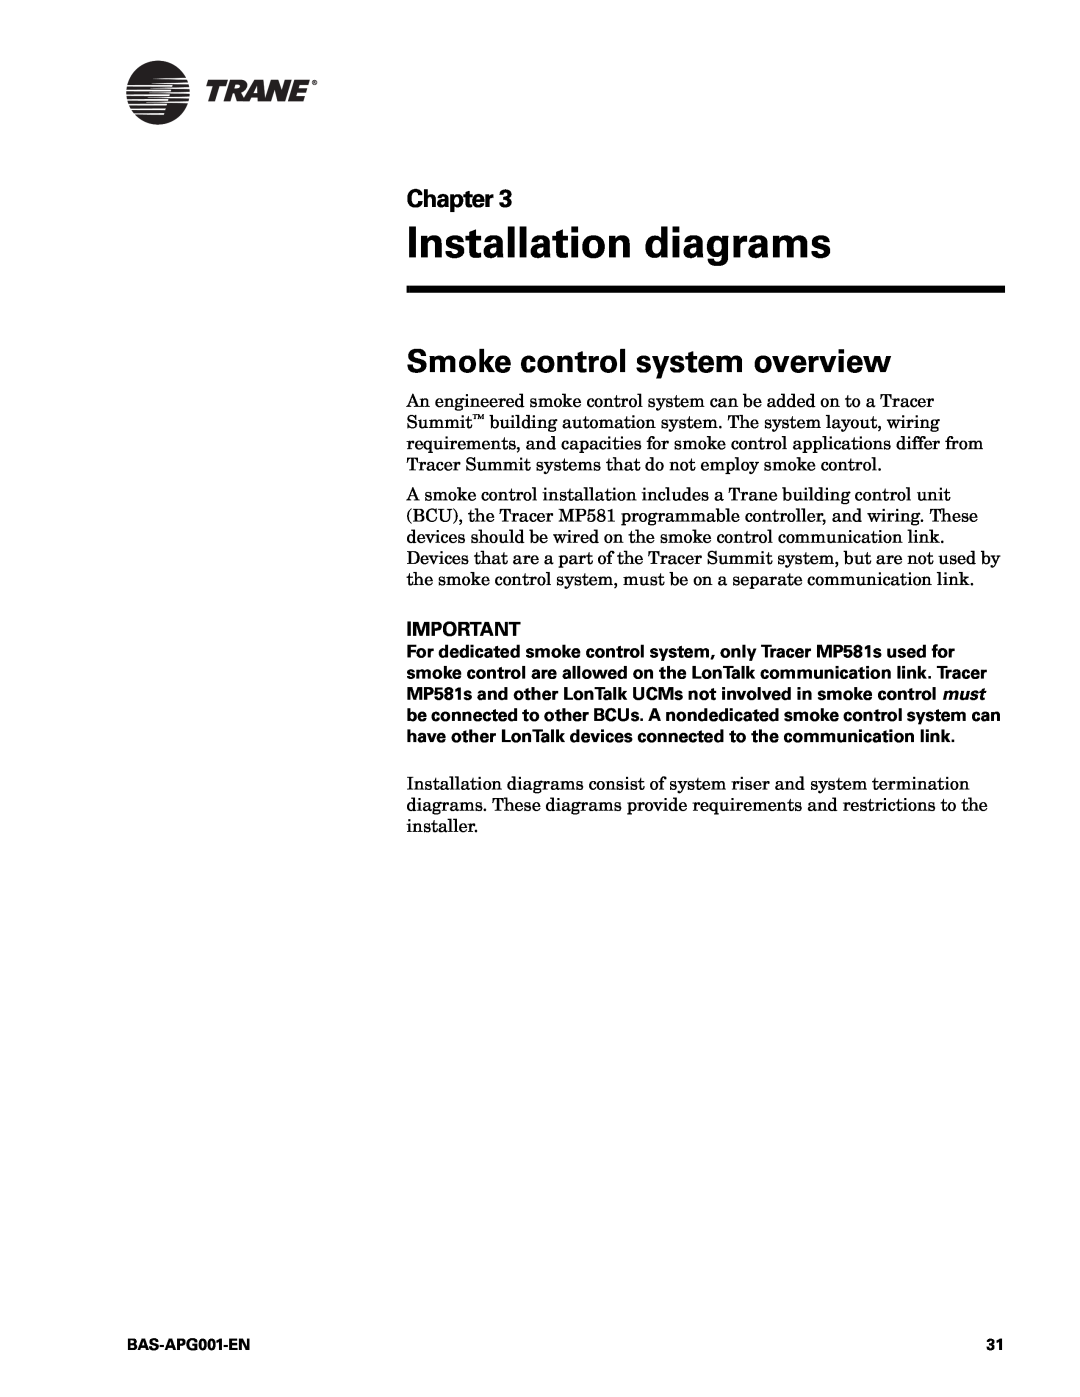 Trane Engineered Smoke Control System for Tracer Summit manual Installation diagrams, Smoke control system overview 